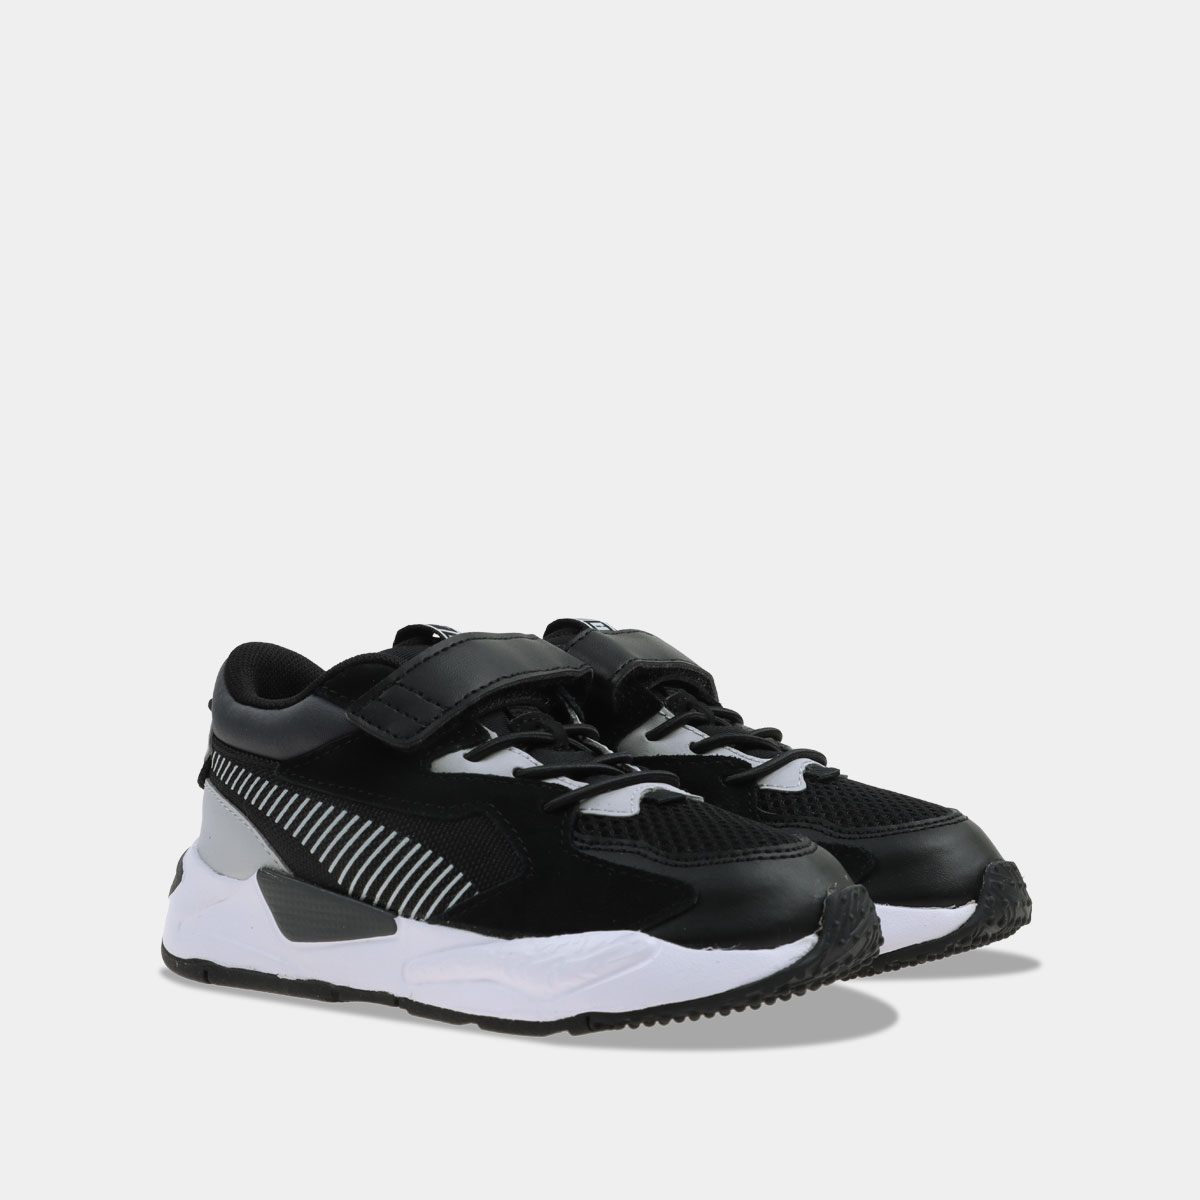 Puma RS-Z Reinvention AC Black/White peuter sneakers